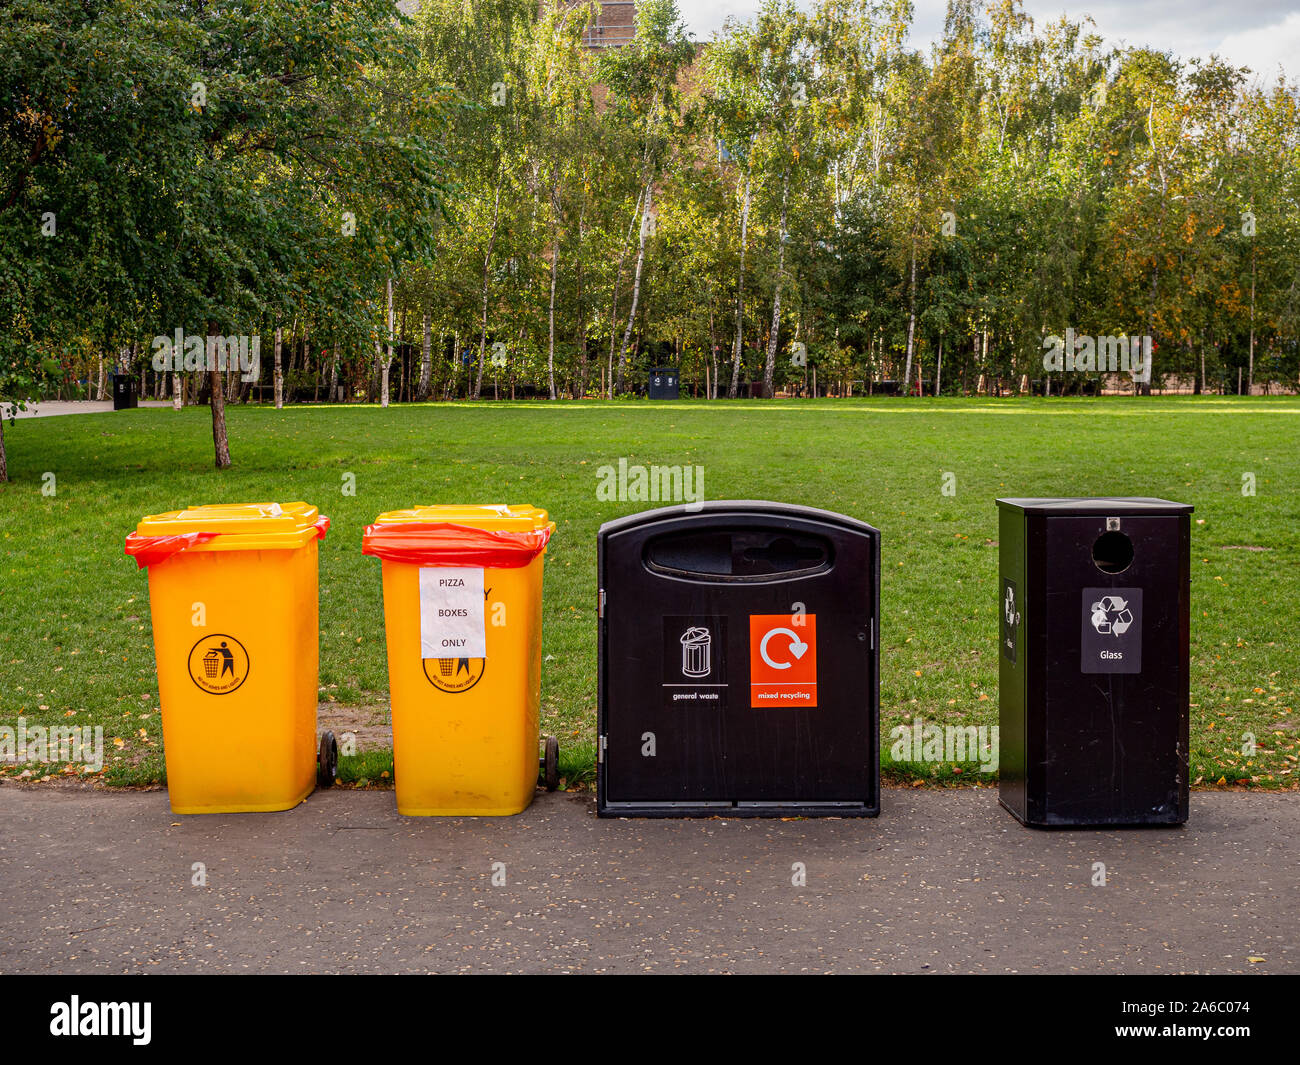 General Waste and Recycling bins in public park, UK. Stock Photo